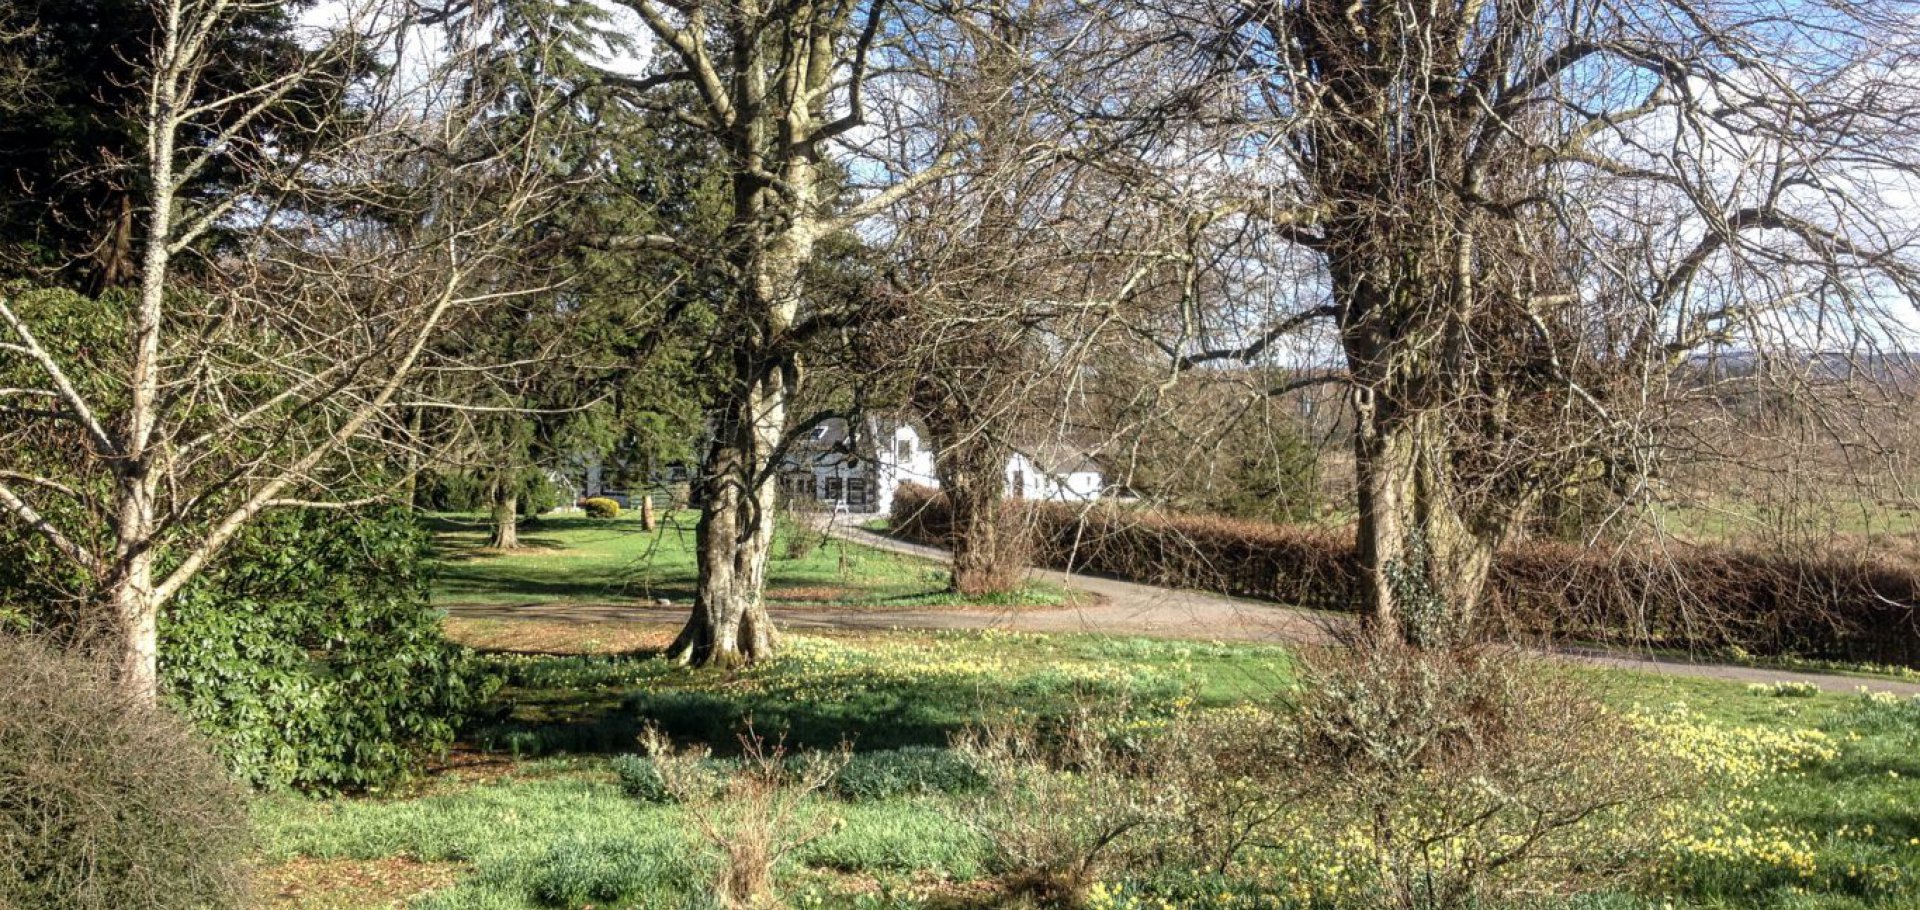 The Mews glimpsed through the trees and daffodils in Spring - see our last minute special offers